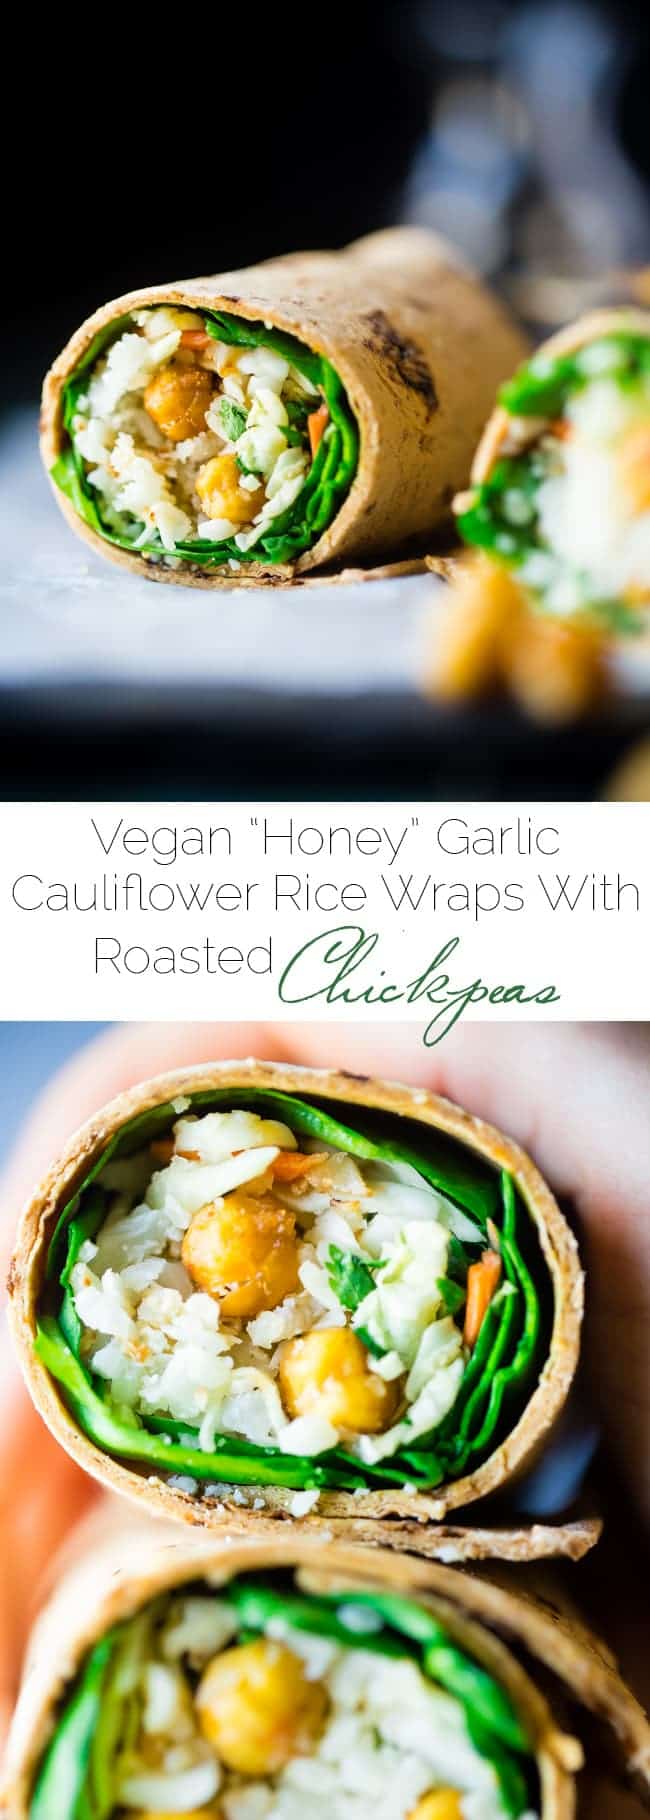 Vegan "Honey" Garlic Chickpea and Cauliflower Rice Wrap - This healthy wrap has an Asian flair with crunchy "honey" garlic roasted chickpeas and cauliflower rice! It's a quick and easy, portable and vegan friendly meal that's perfect for lunchboxes! Gluten free option included! | Foodfaithfitness.com | @FoodFaithFit